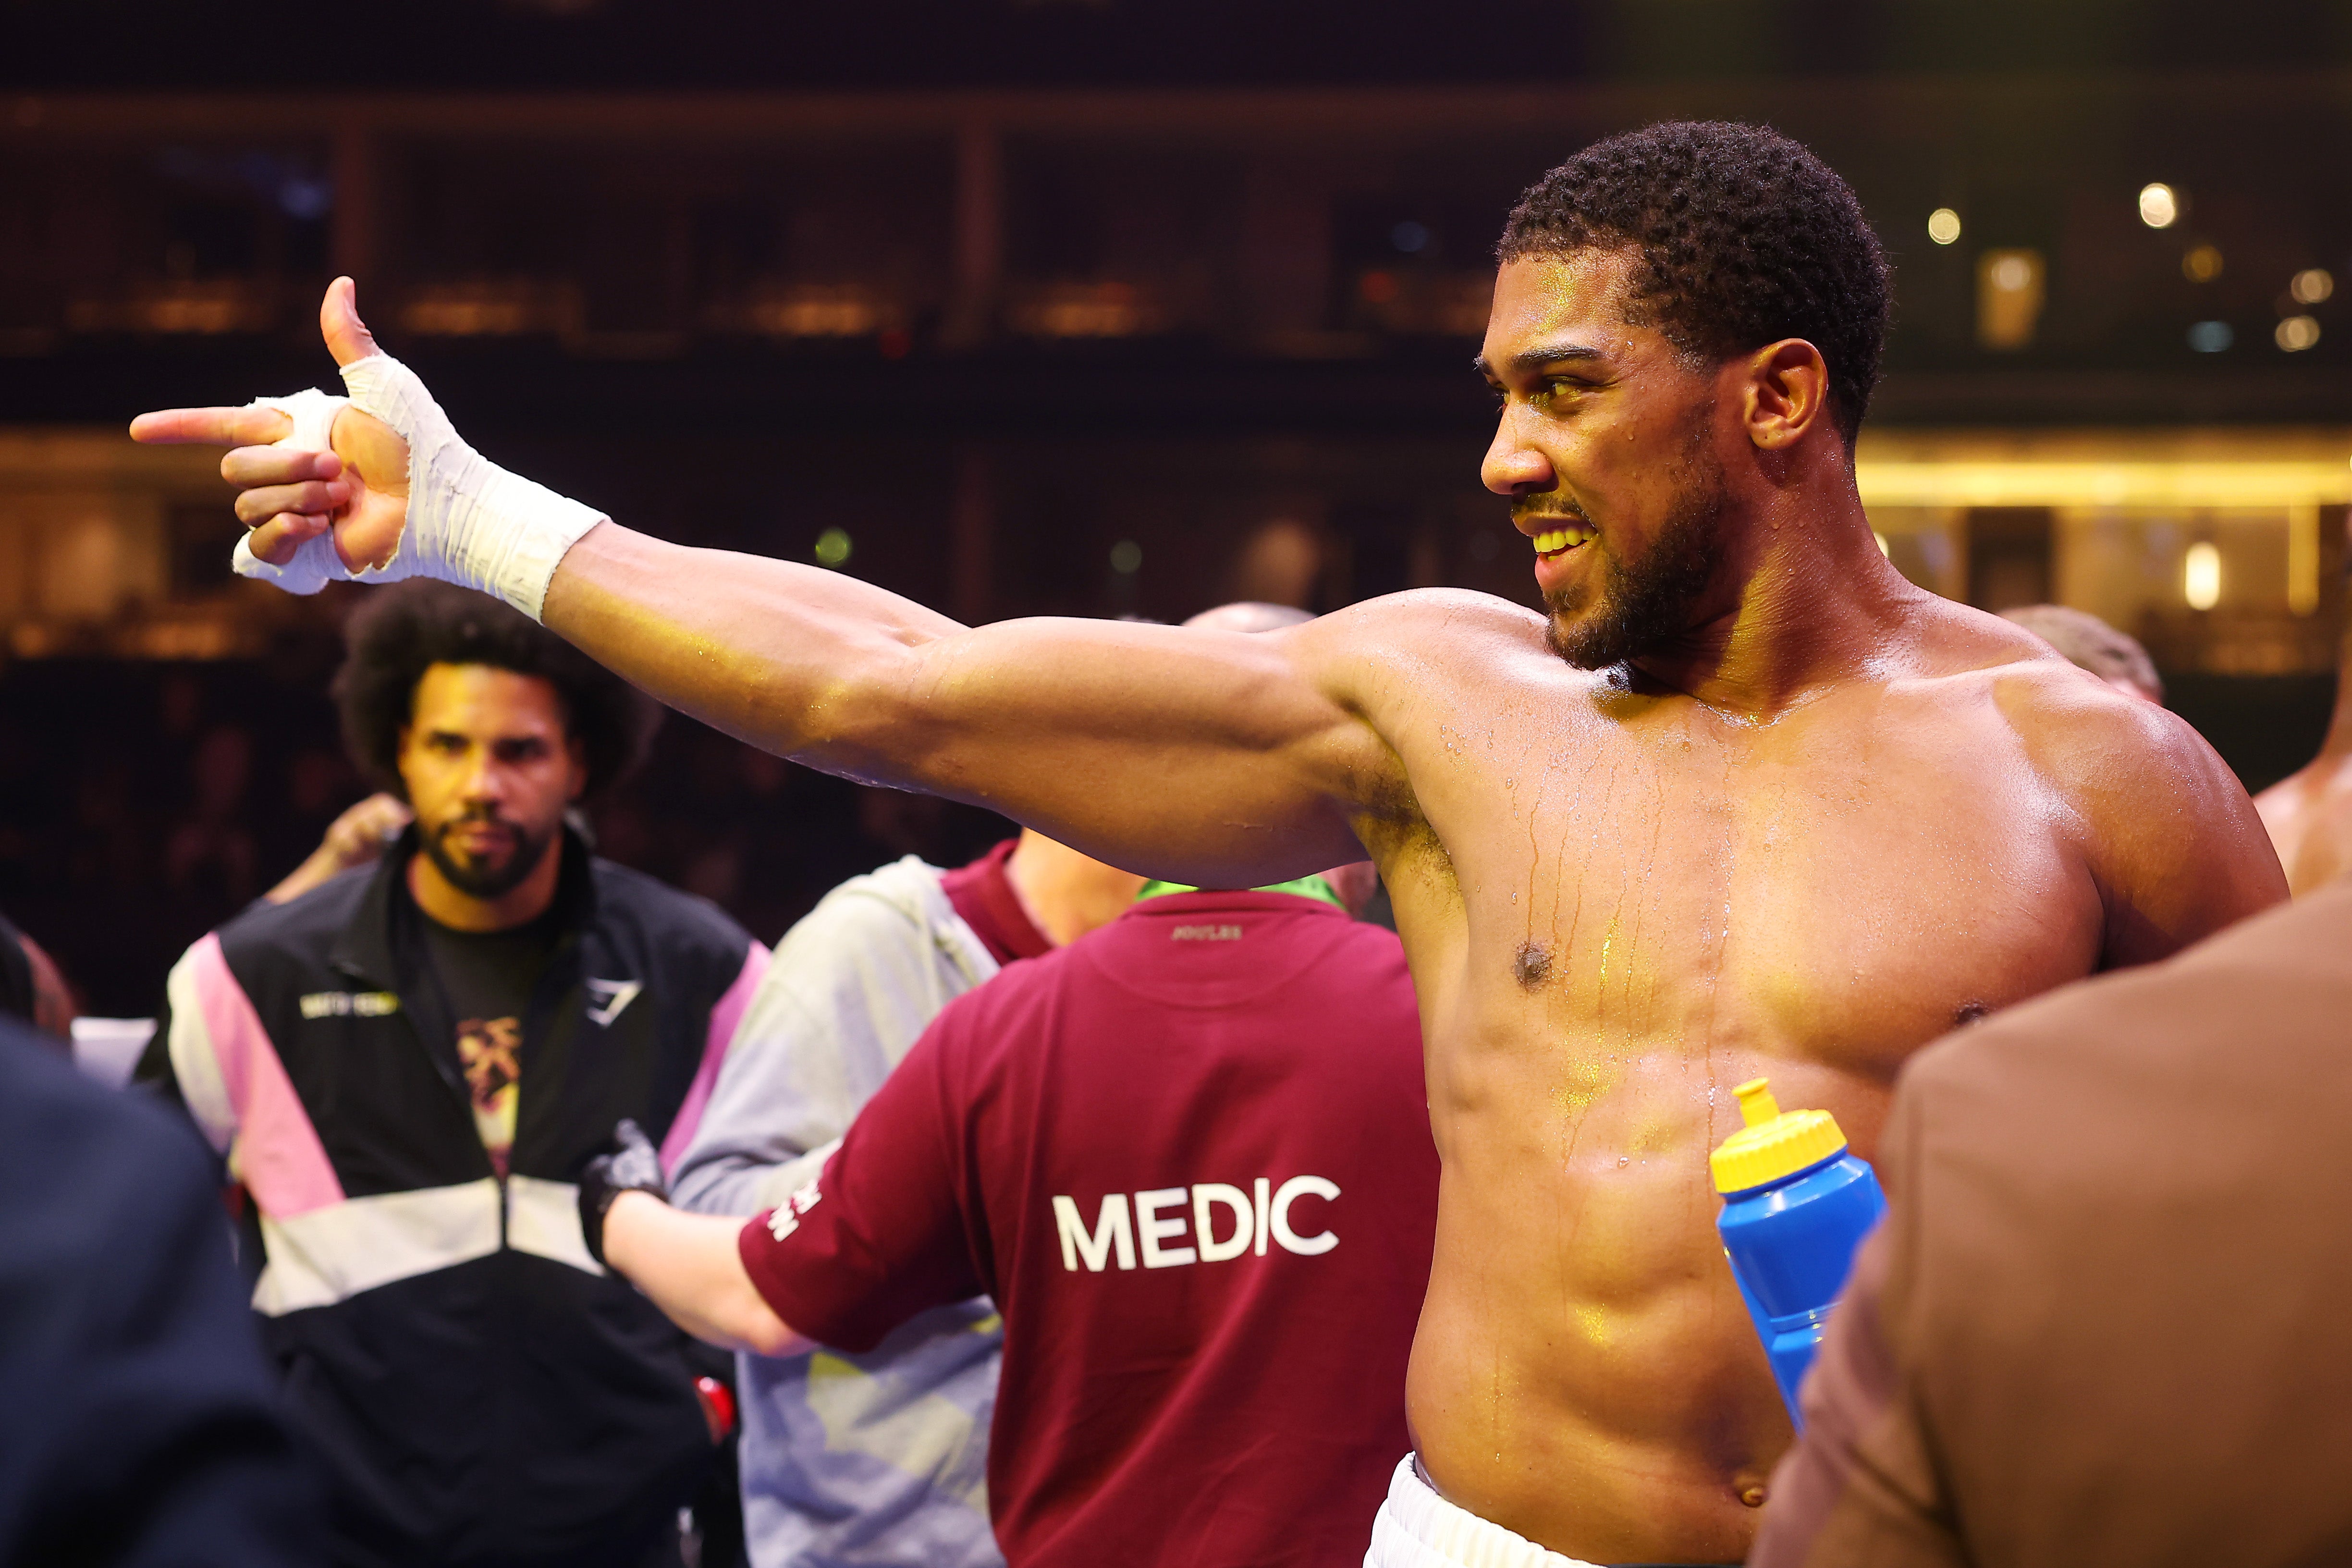 Anthony Joshua gestures towards Tyson Fury following the fight